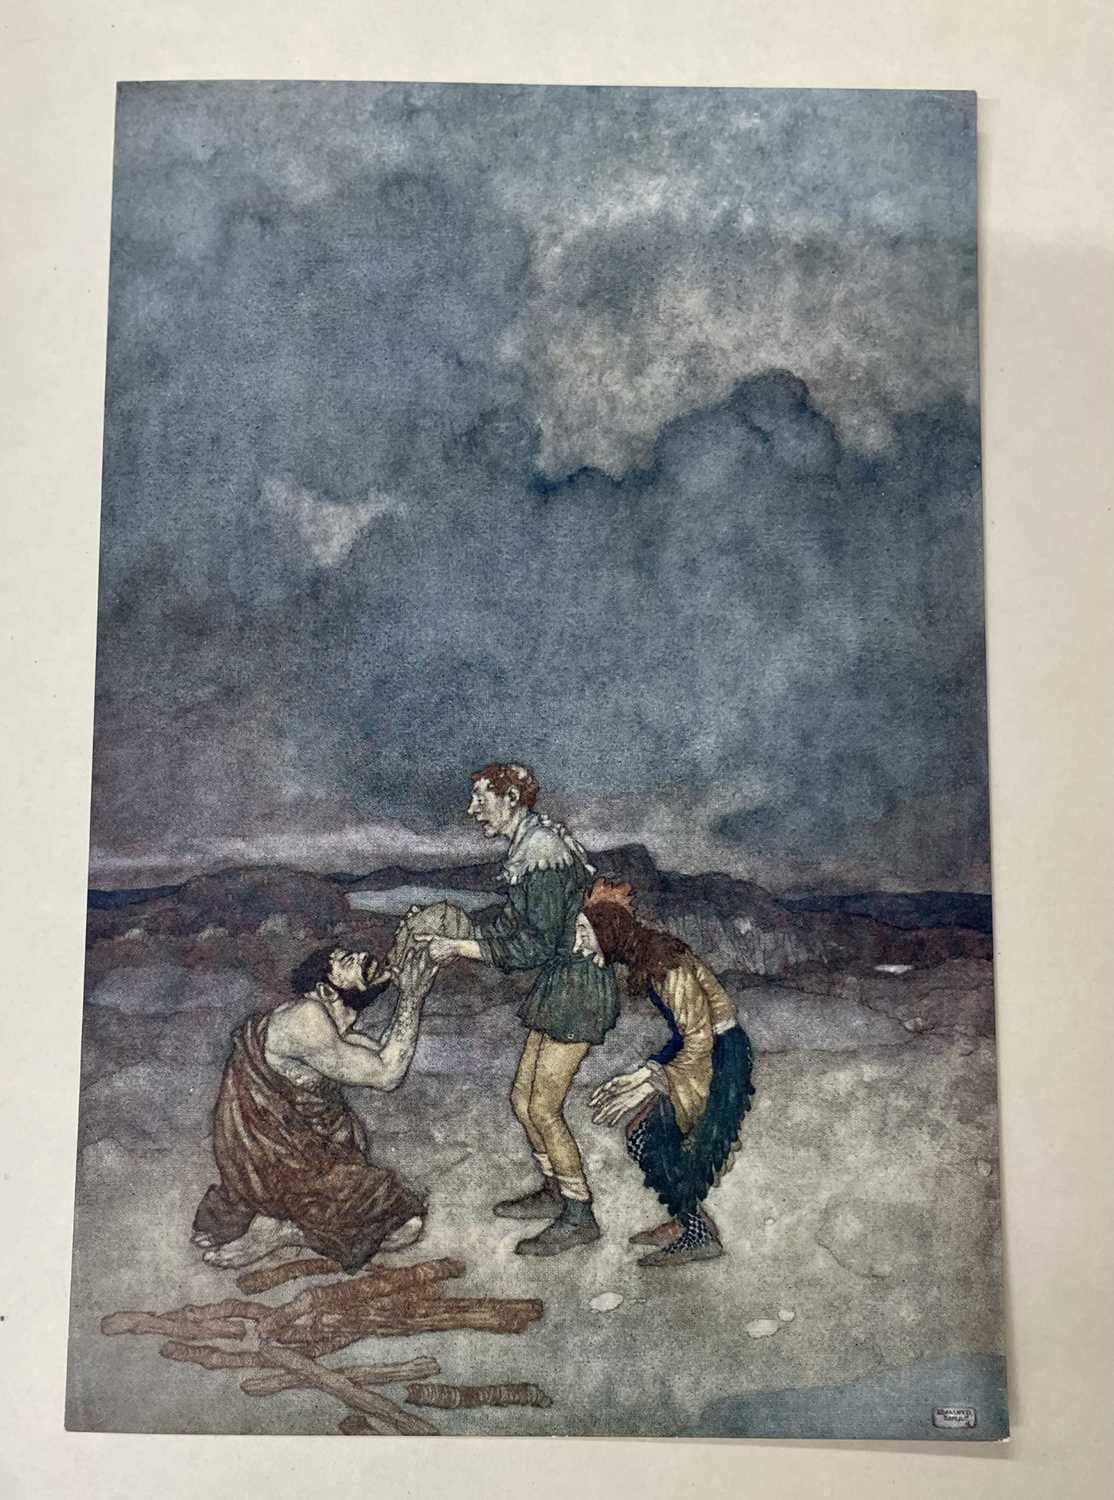 EDMUND DULAC (ILLUS): 2 TITLES: EDMUND DULAC'S PICTURE BOOK FOR THE RED CROSS, London, Hodder and - Image 4 of 5